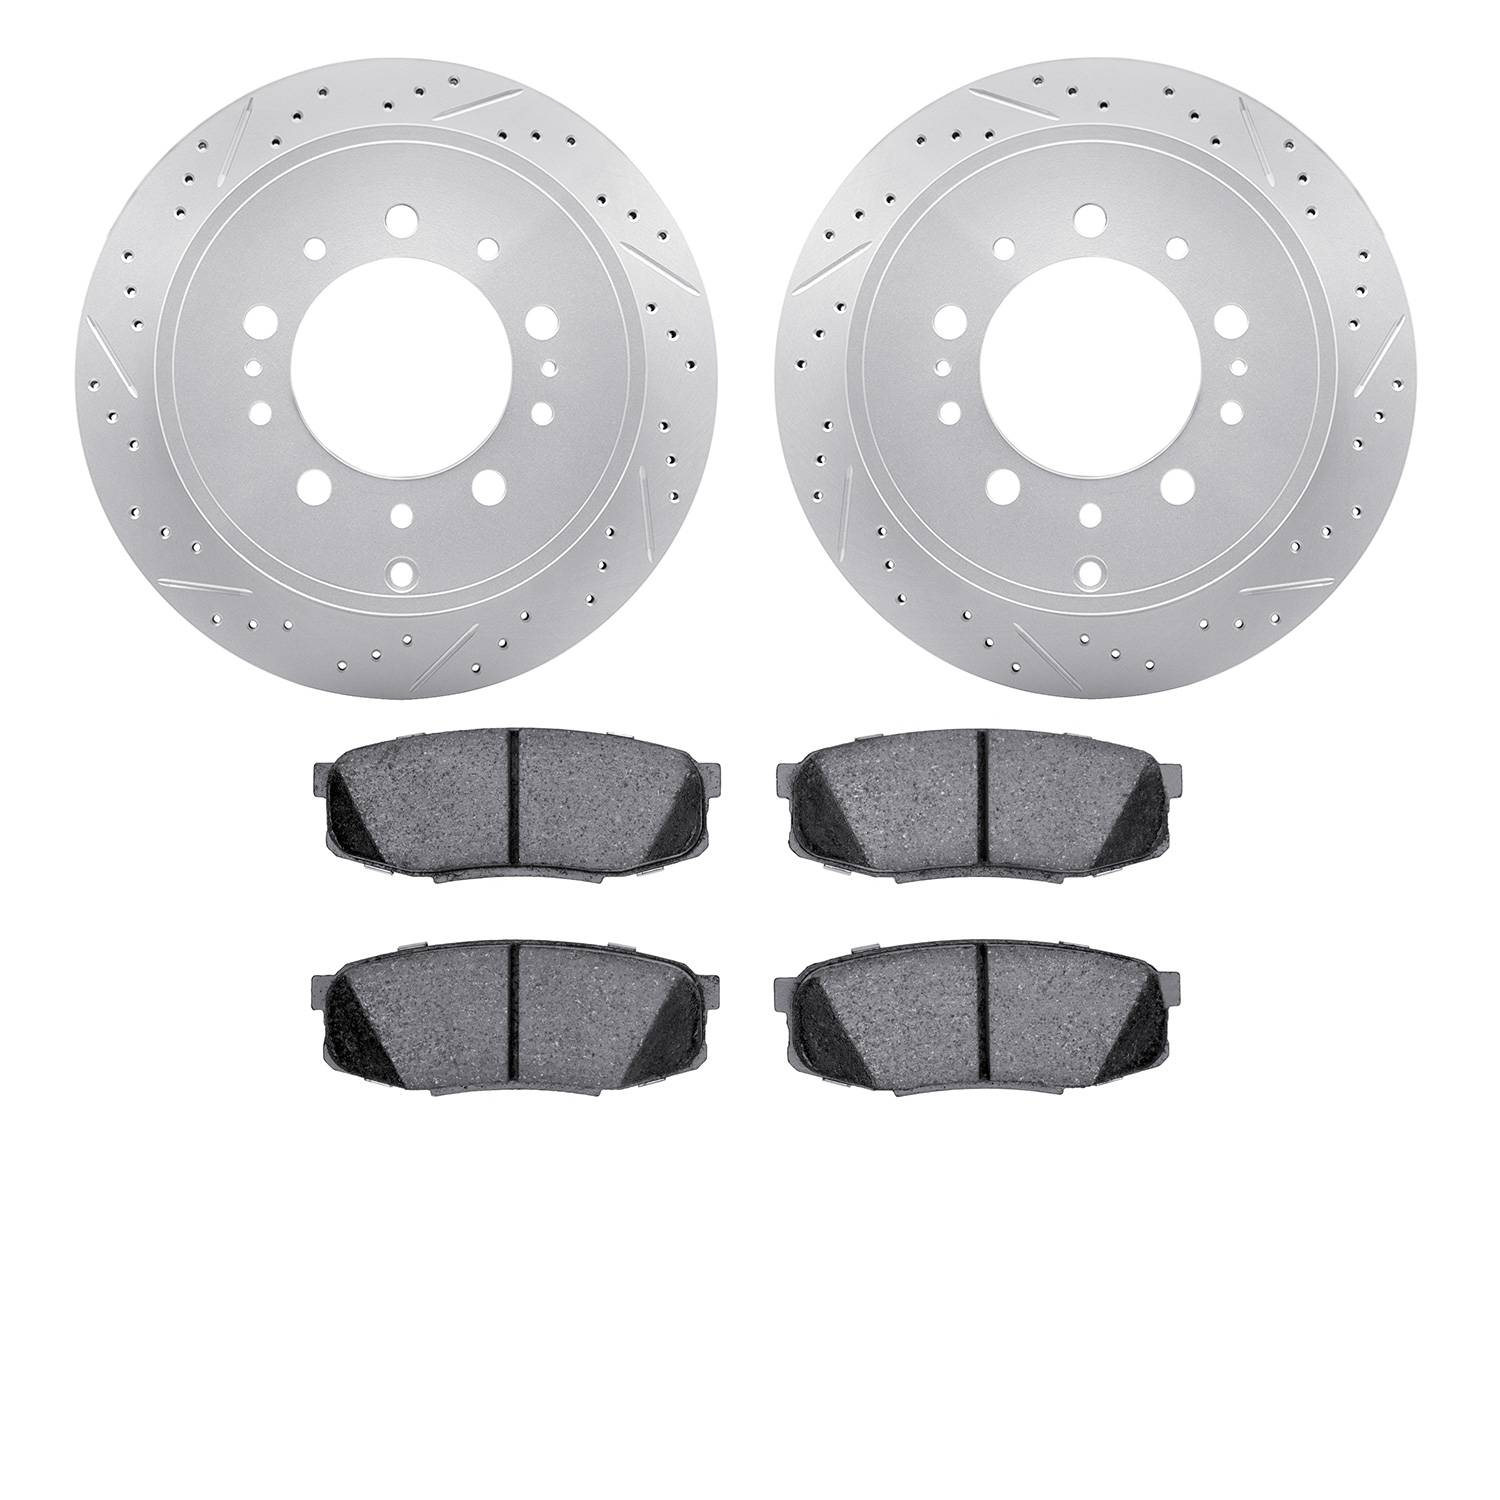 2402-76014 Geoperformance Drilled/Slotted Brake Rotors with Ultimate-Duty Brake Pads Kit, Fits Select Lexus/Toyota/Scion, Positi